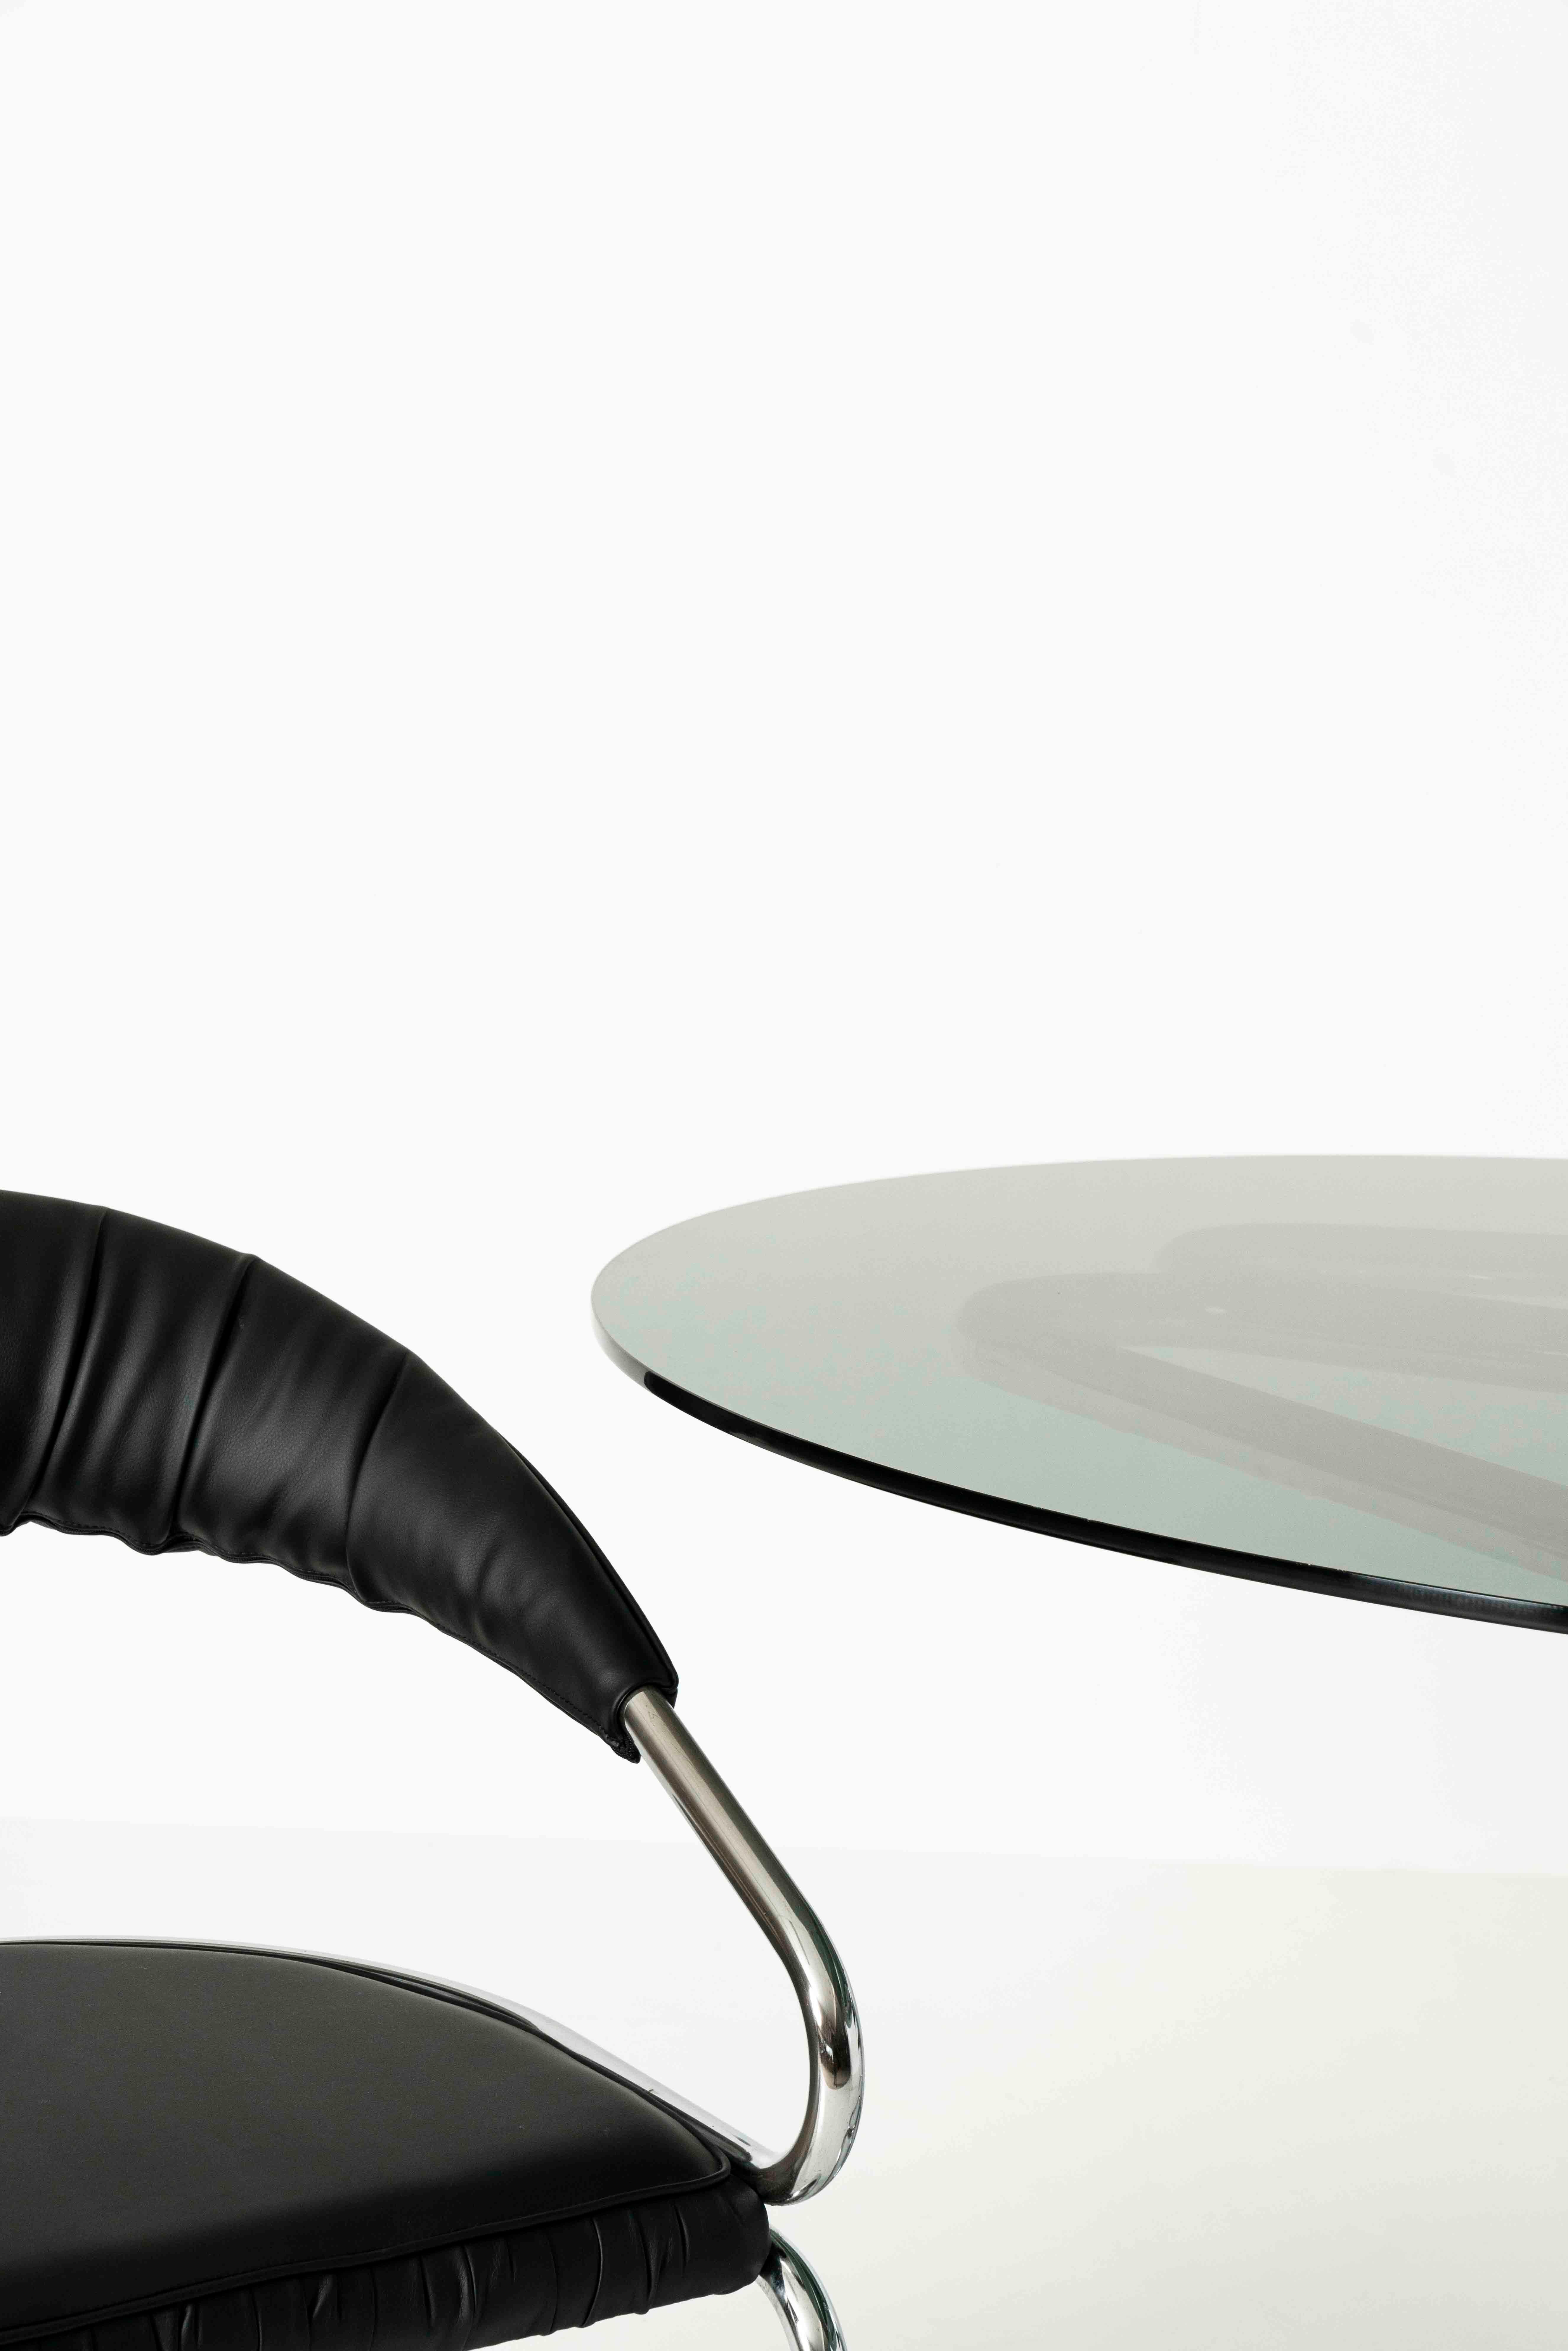 Tubular Dining Room Table in Chrome and Smoked Glass by Giotto Stoppino, 1970s For Sale 4